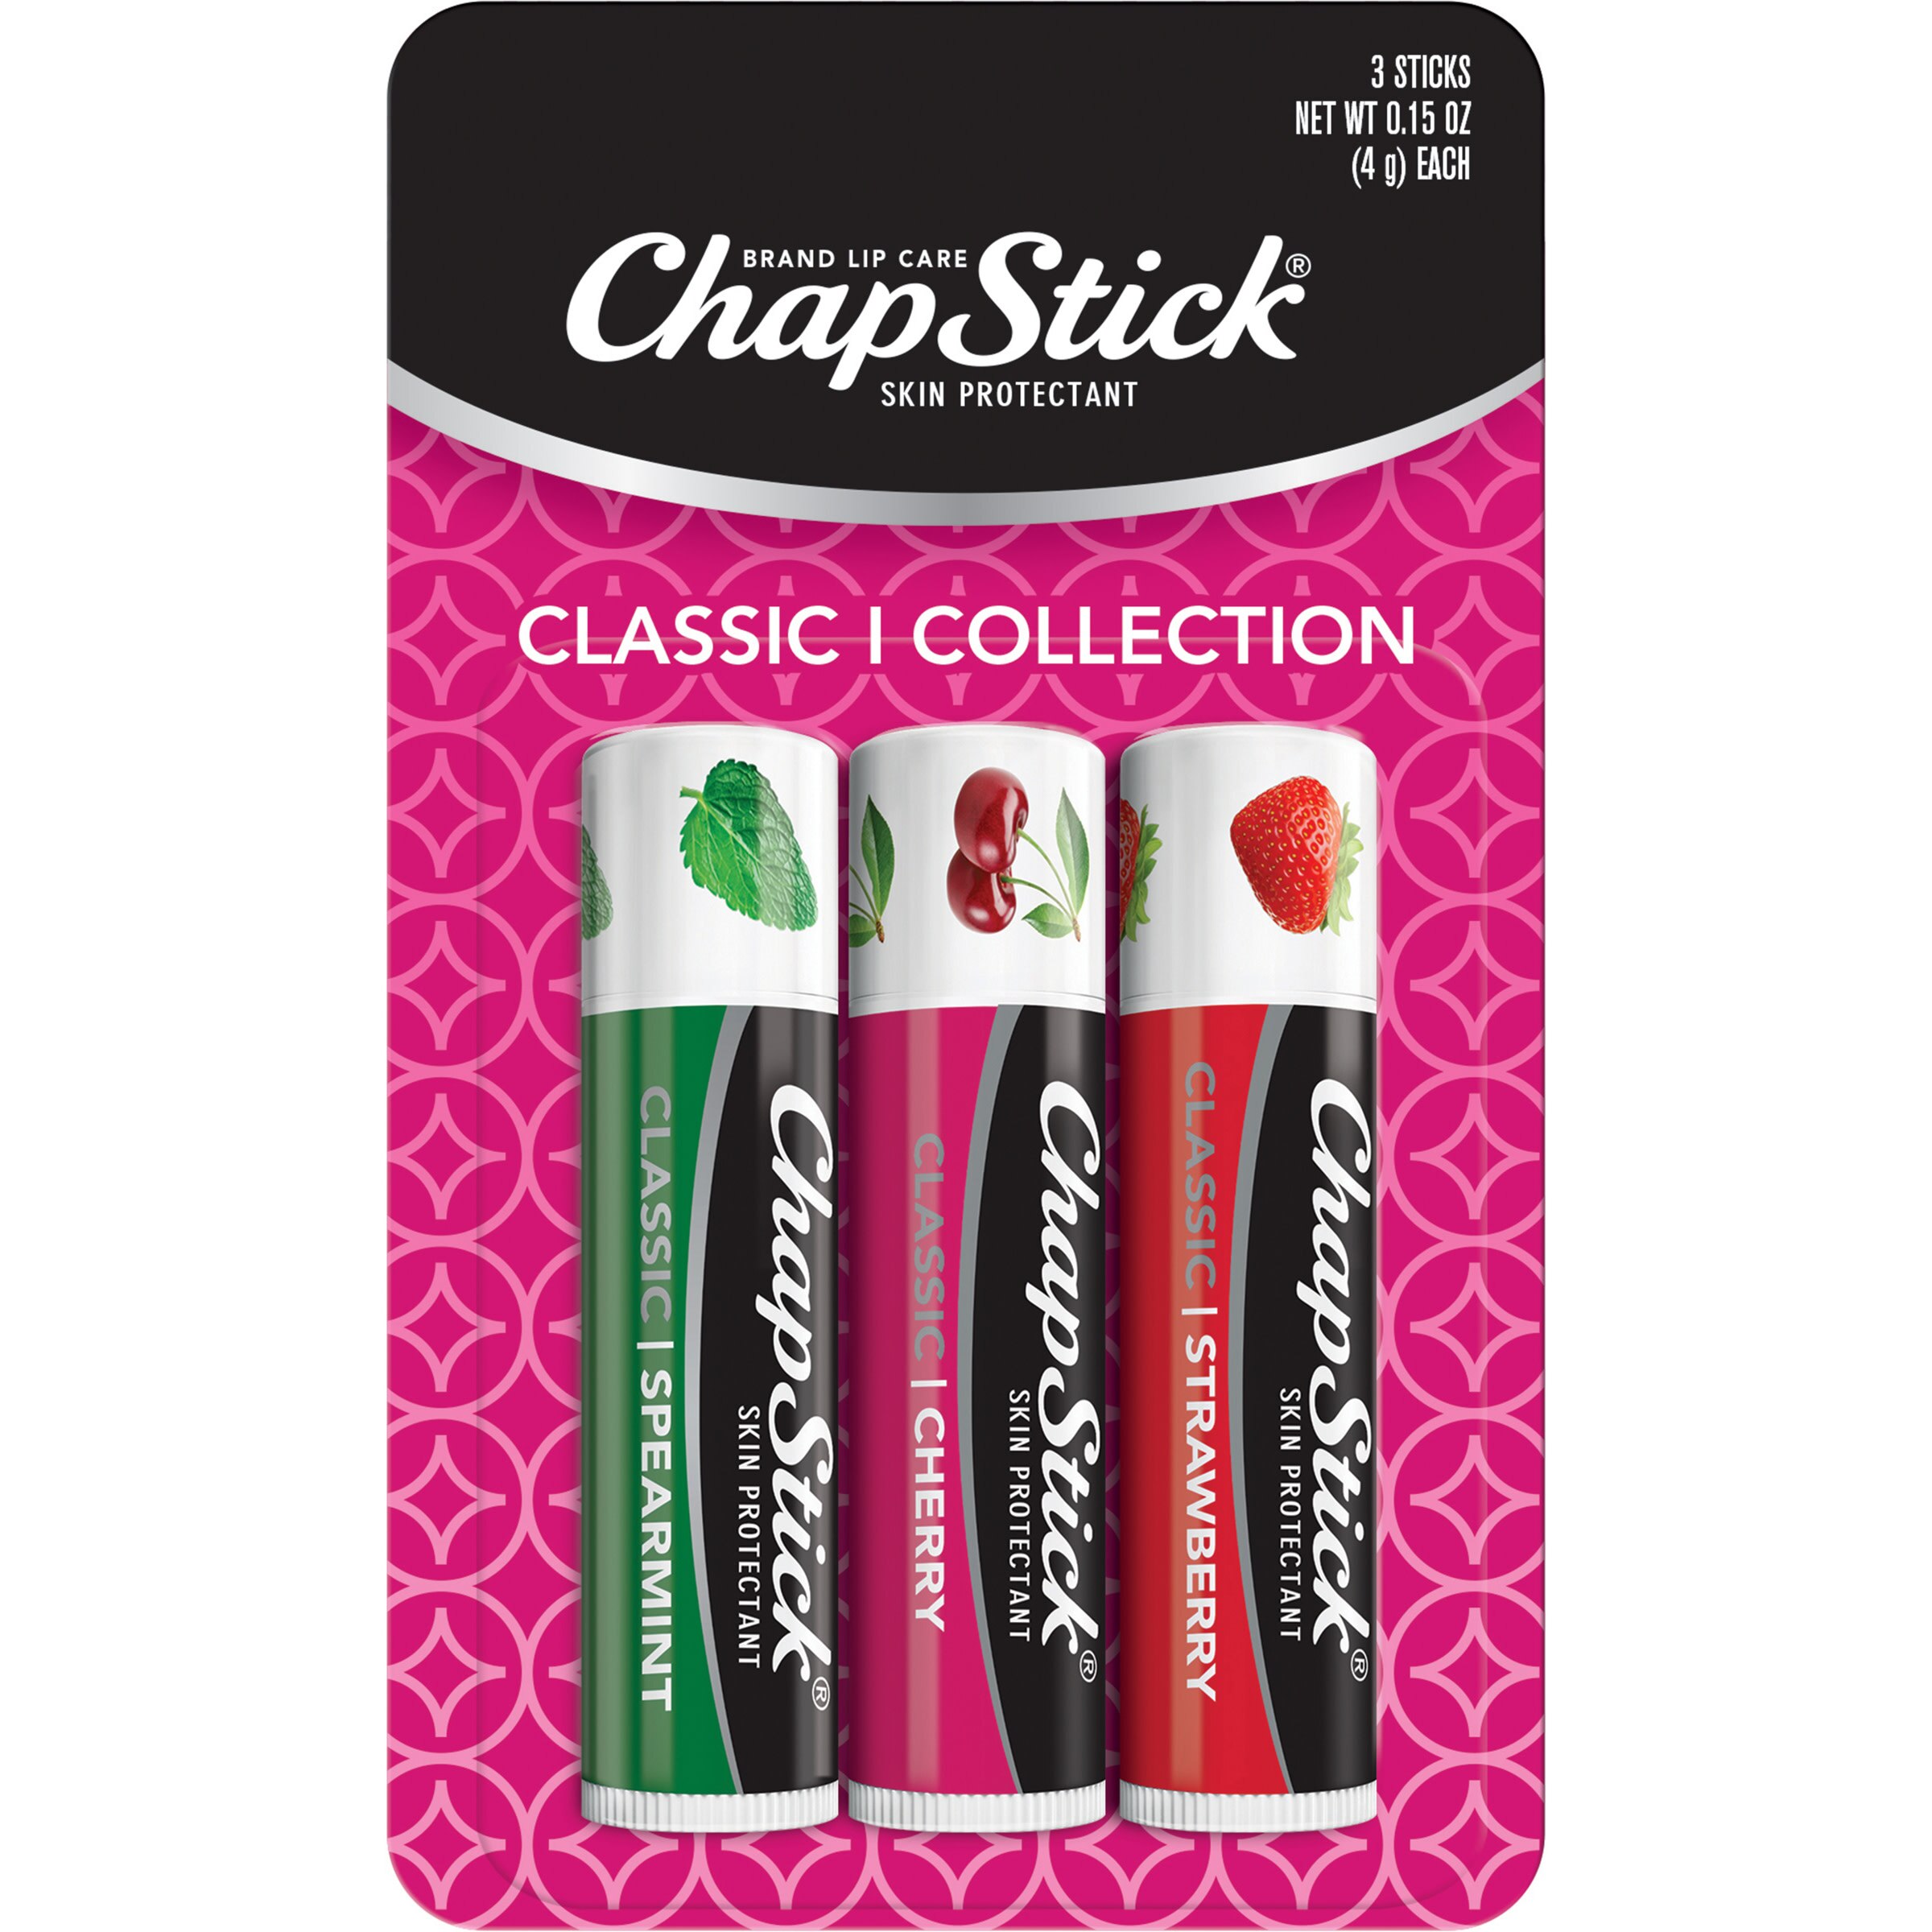 ChapStick Classic Spearmint, Cherry and Strawberry Lip Balm Variety Pack, 0.15 OZ, 3 CT